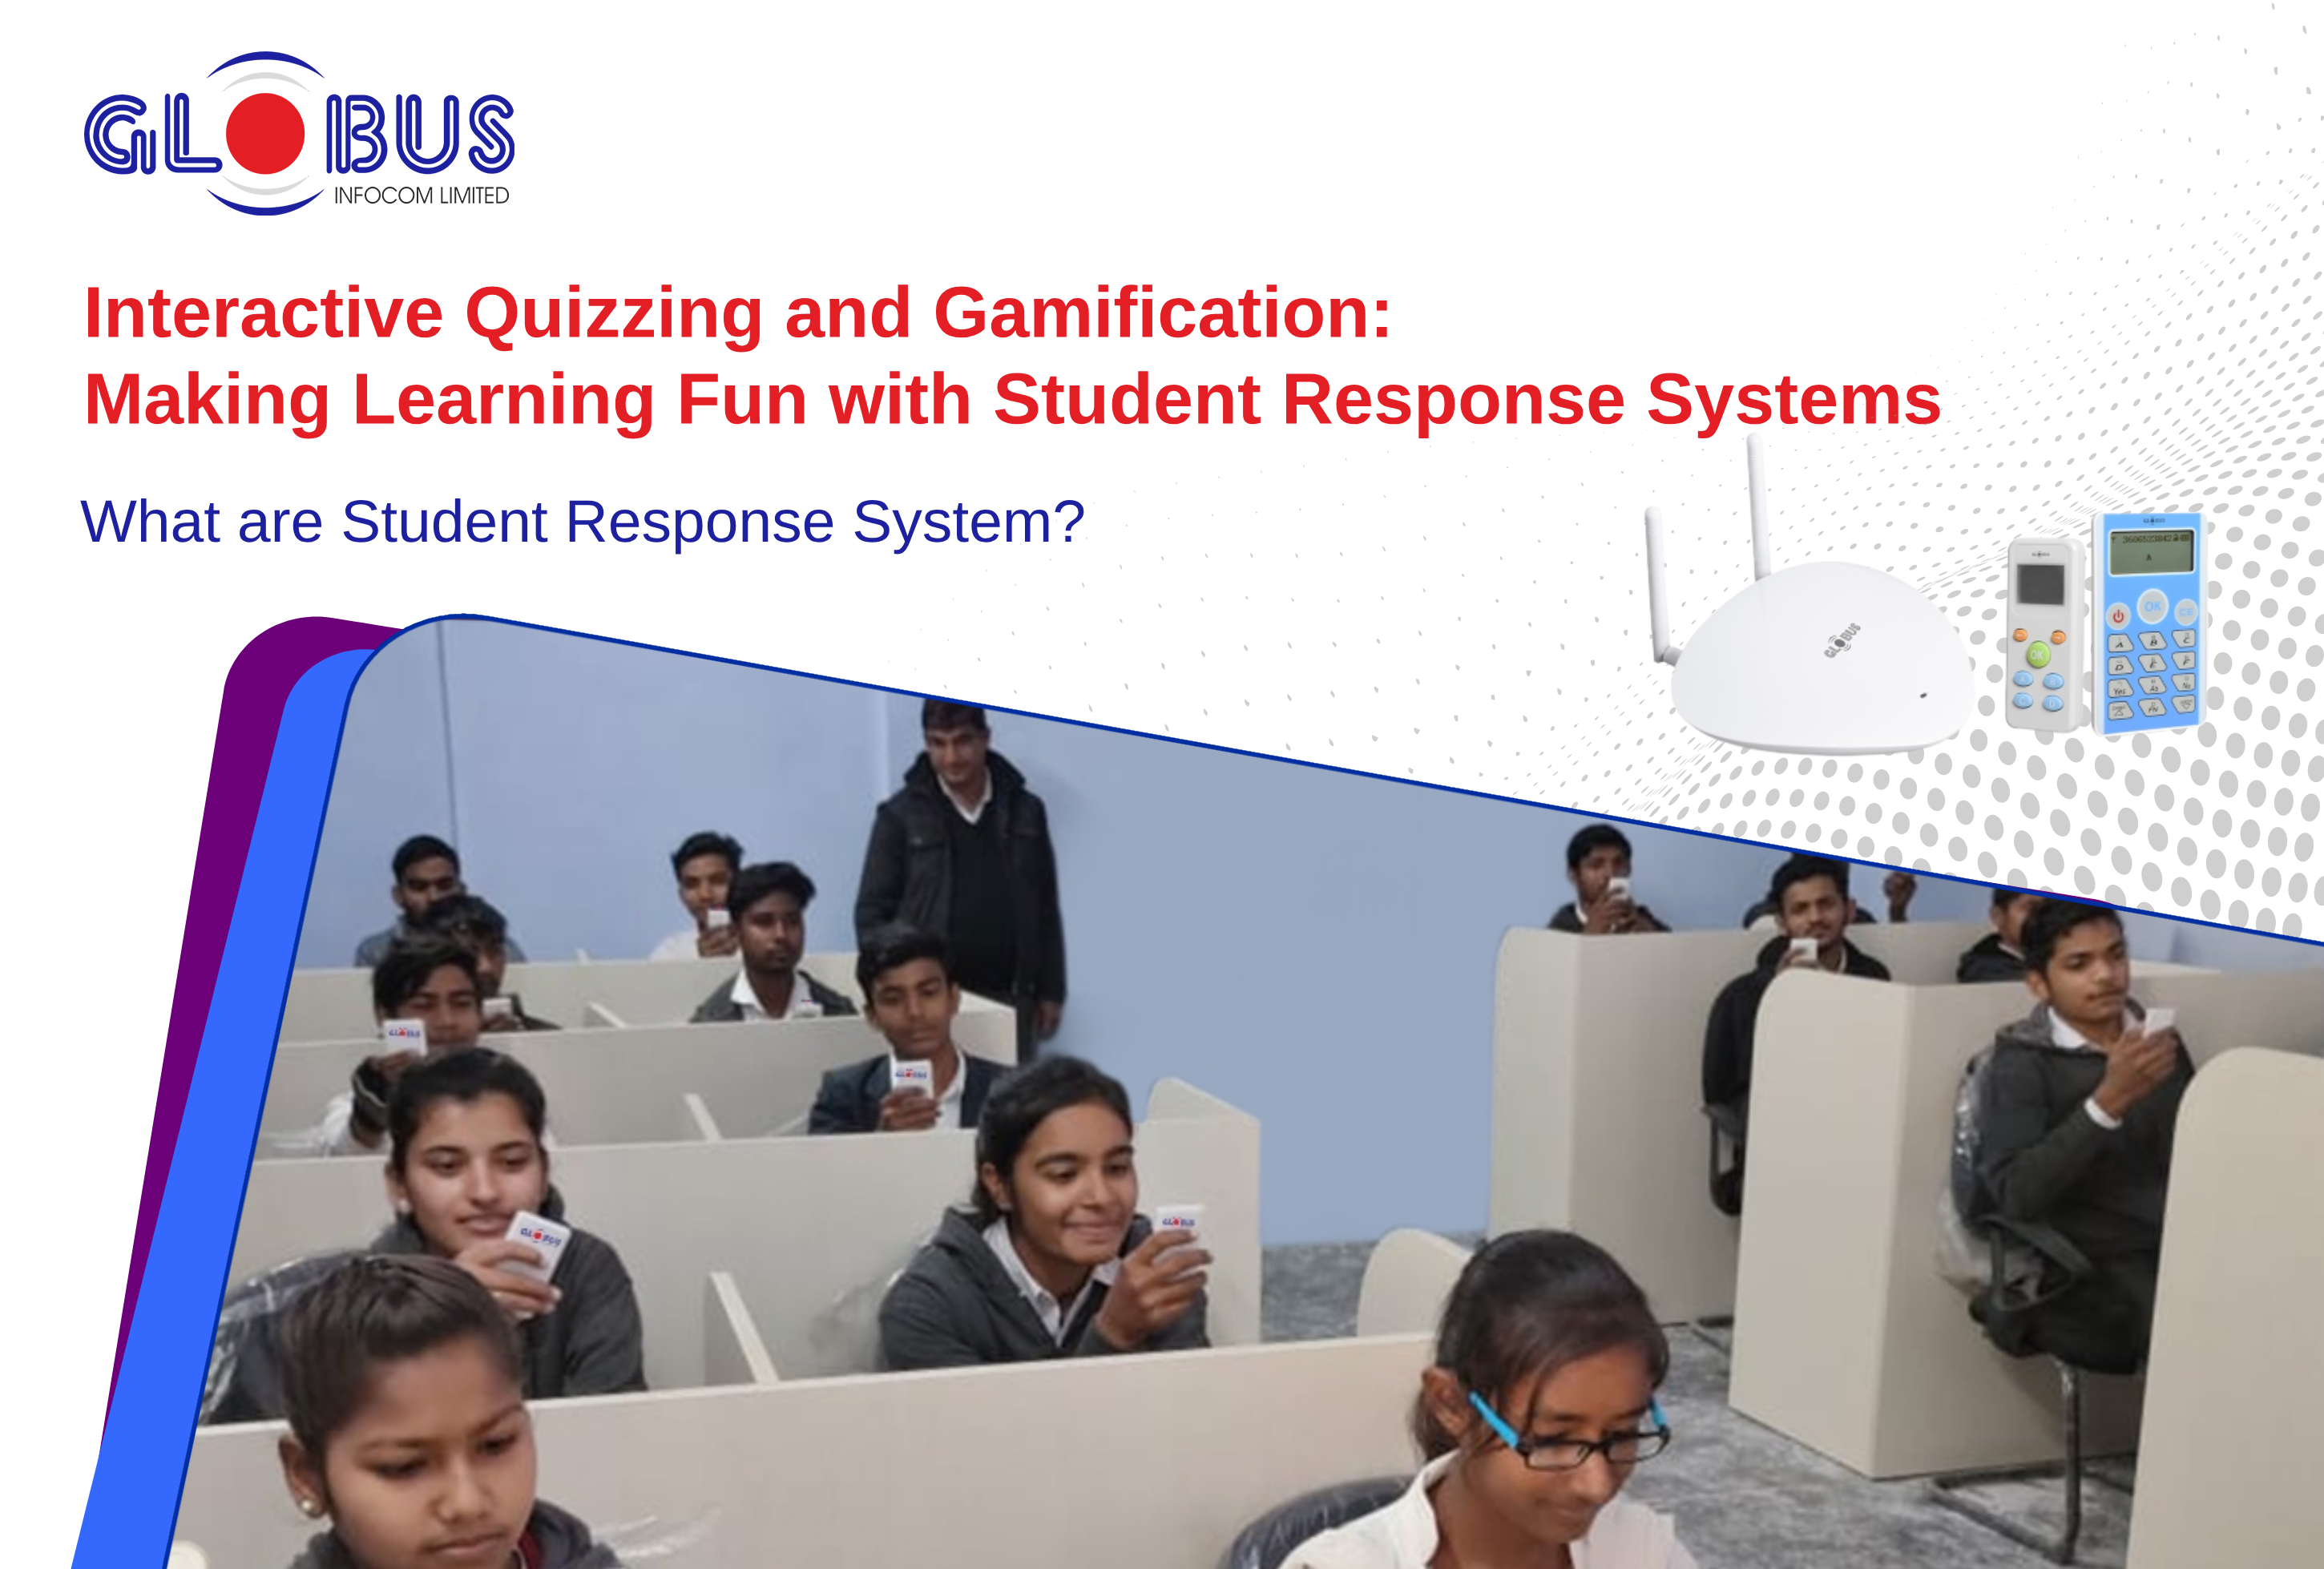 Interactive Quizzing and Gamification: Making Learning Fun with Student Response Systems